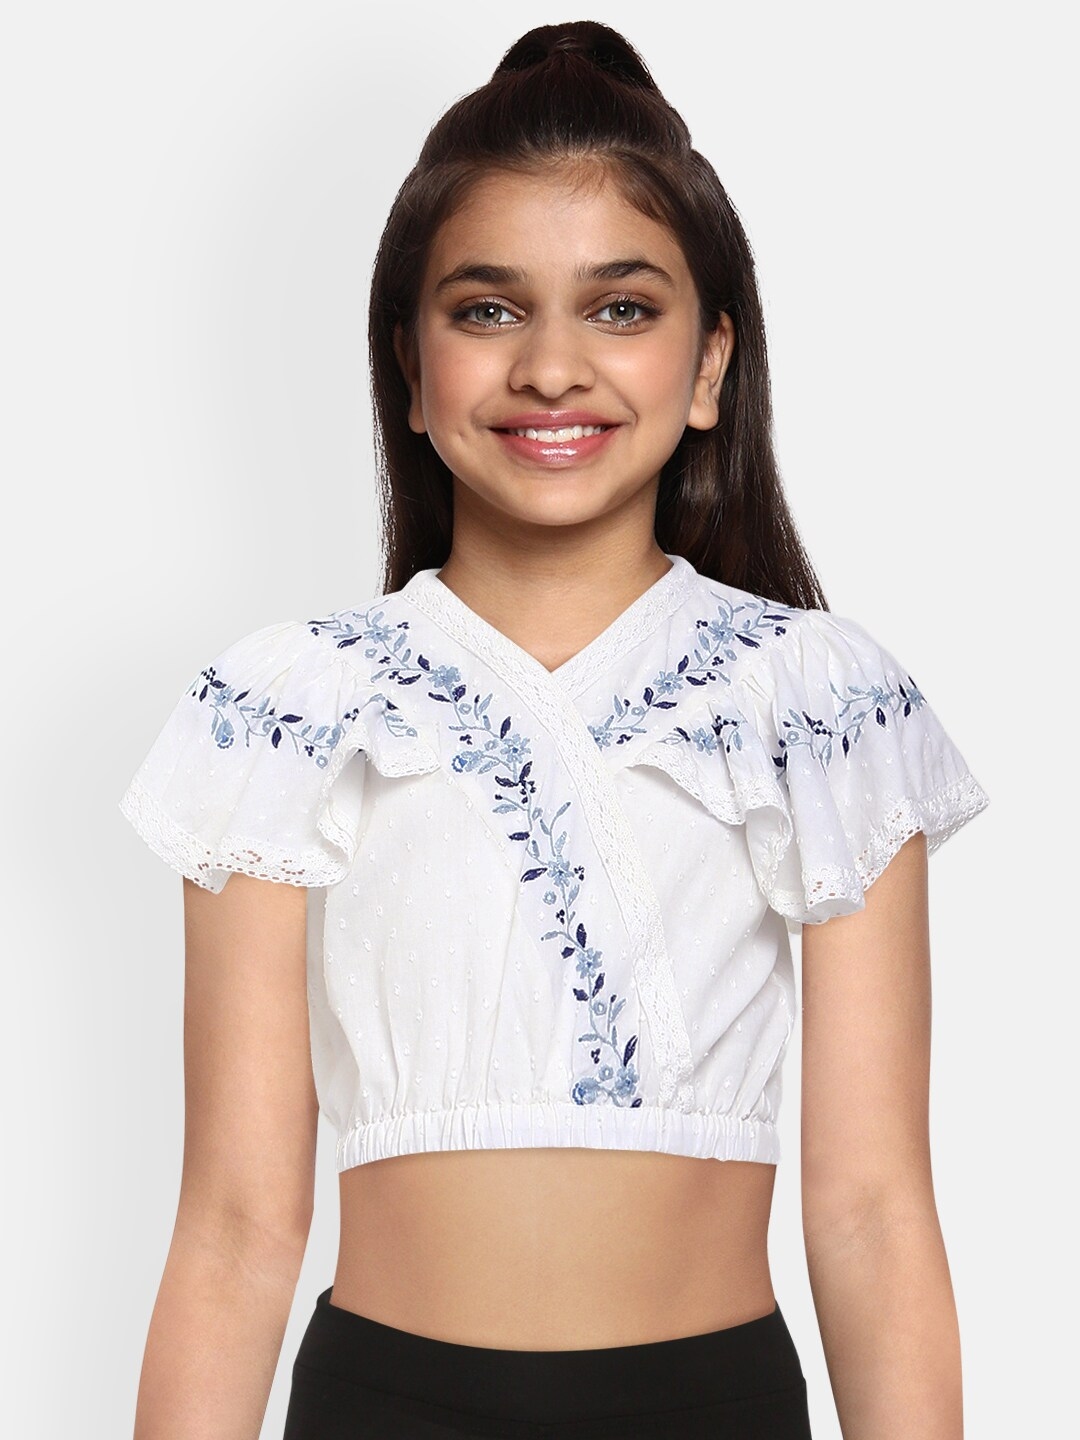 Buy Global Desi Girls White Self Design Embroidered Pure Cotton Crop Top Tops For Girls 